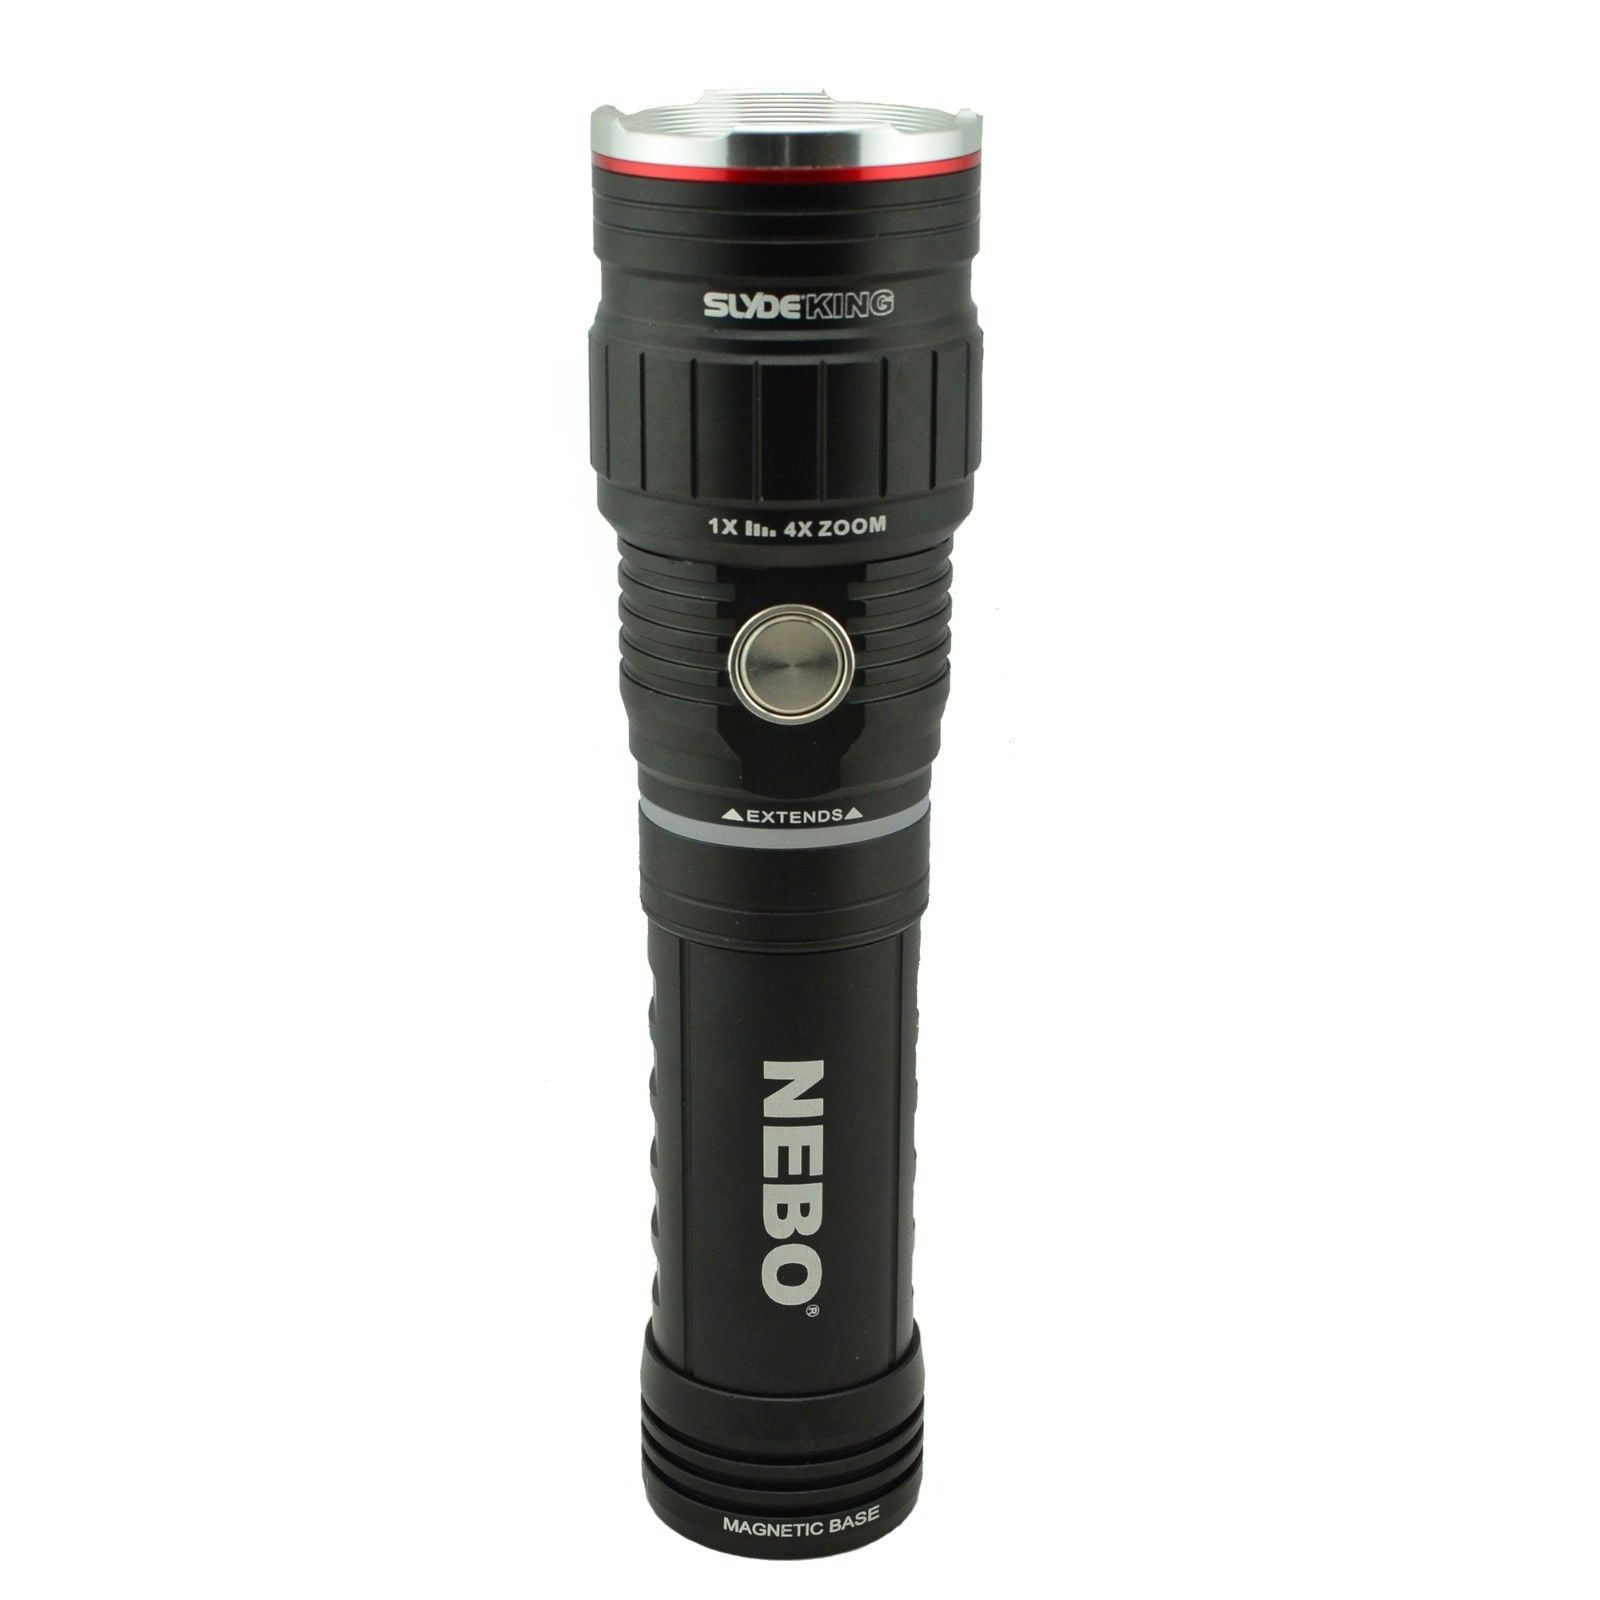 NEBO 6726 NEW Slyde King 500 rechargeable handheld flashlight and work light 